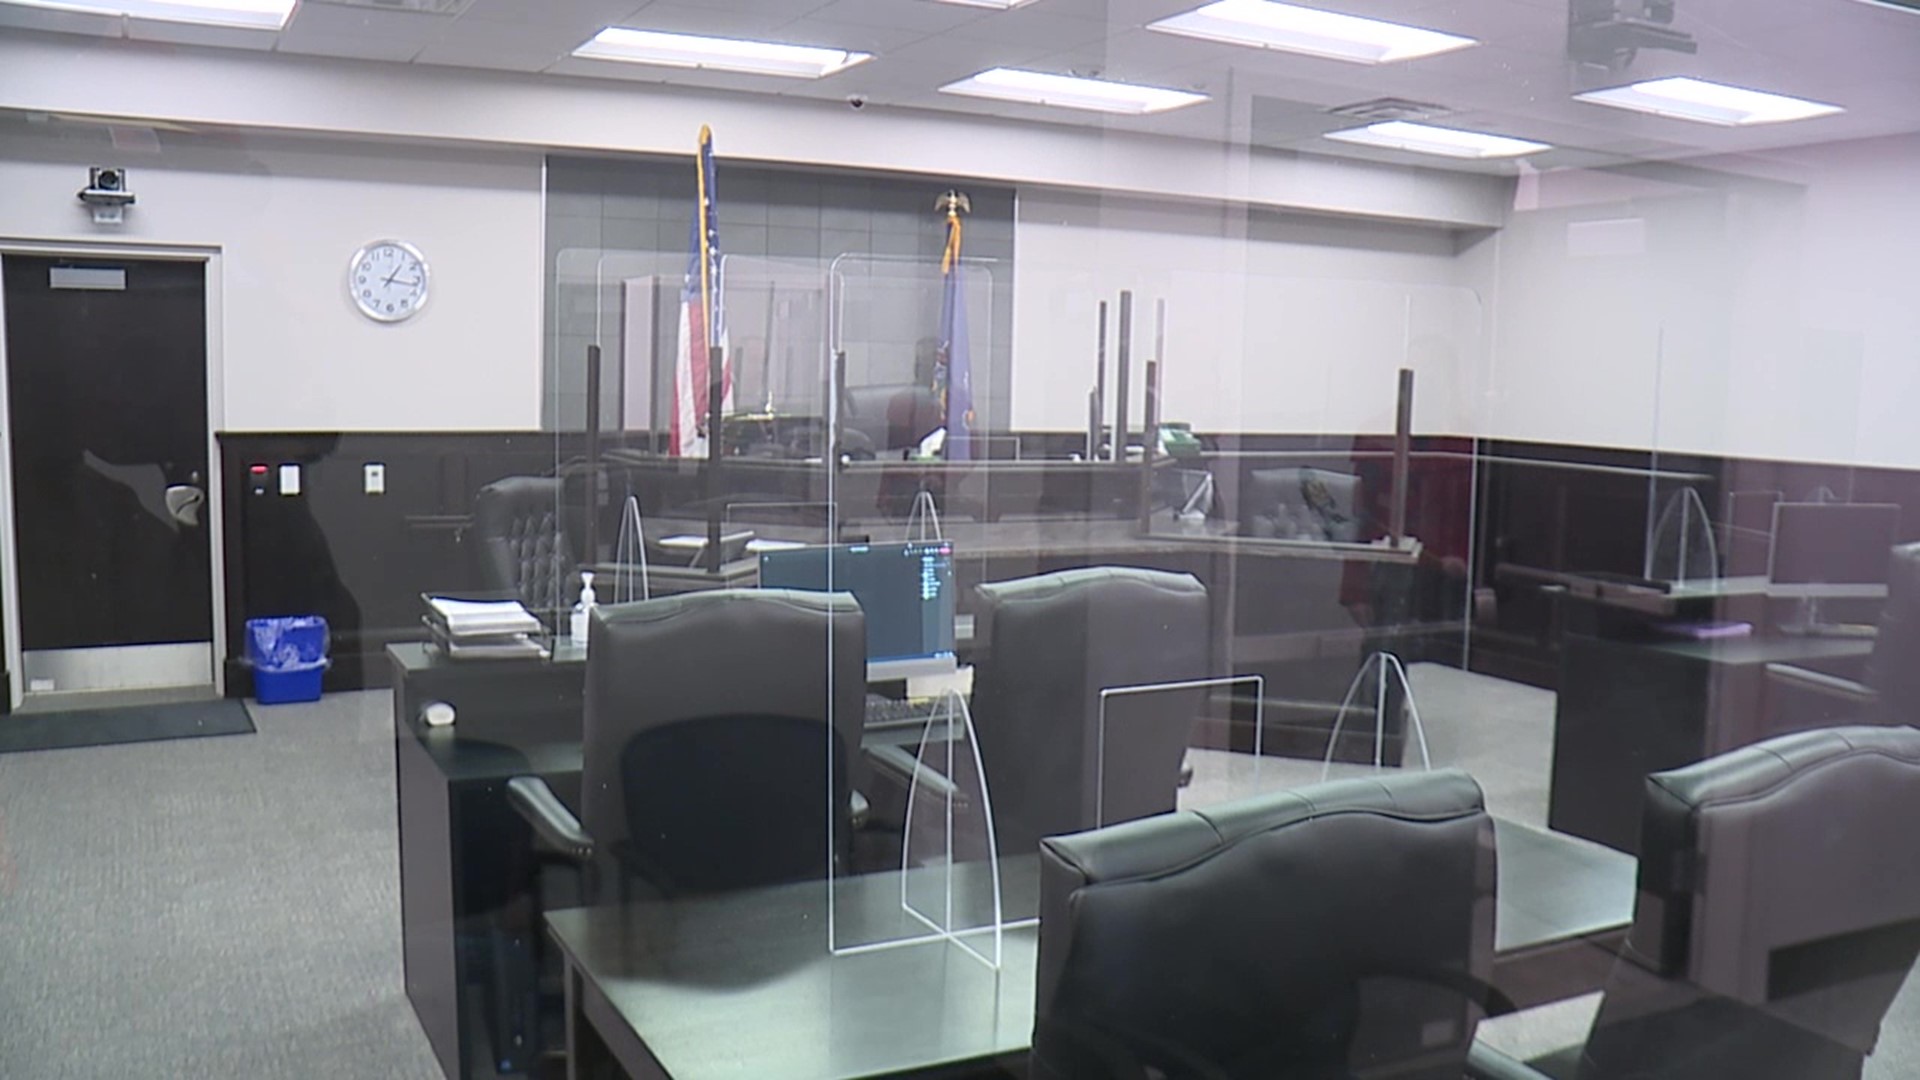 Lackawanna County Central Court has a new home, now called the Lackawanna County Criminal Justice Center.